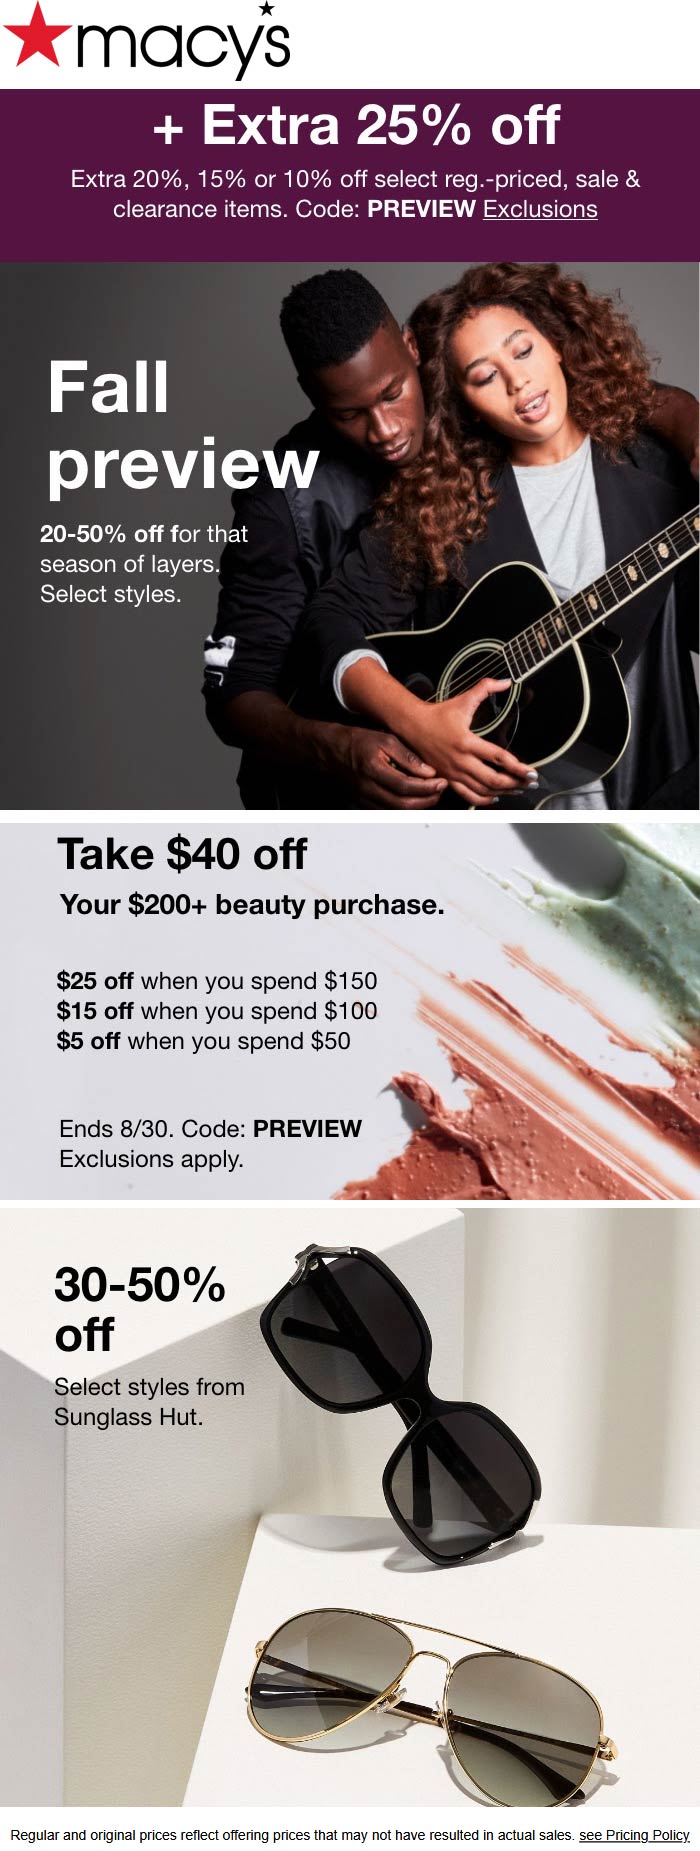 Macys stores Coupon  Extra 25% off at Macys, or online via promo code PREVIEW #macys 